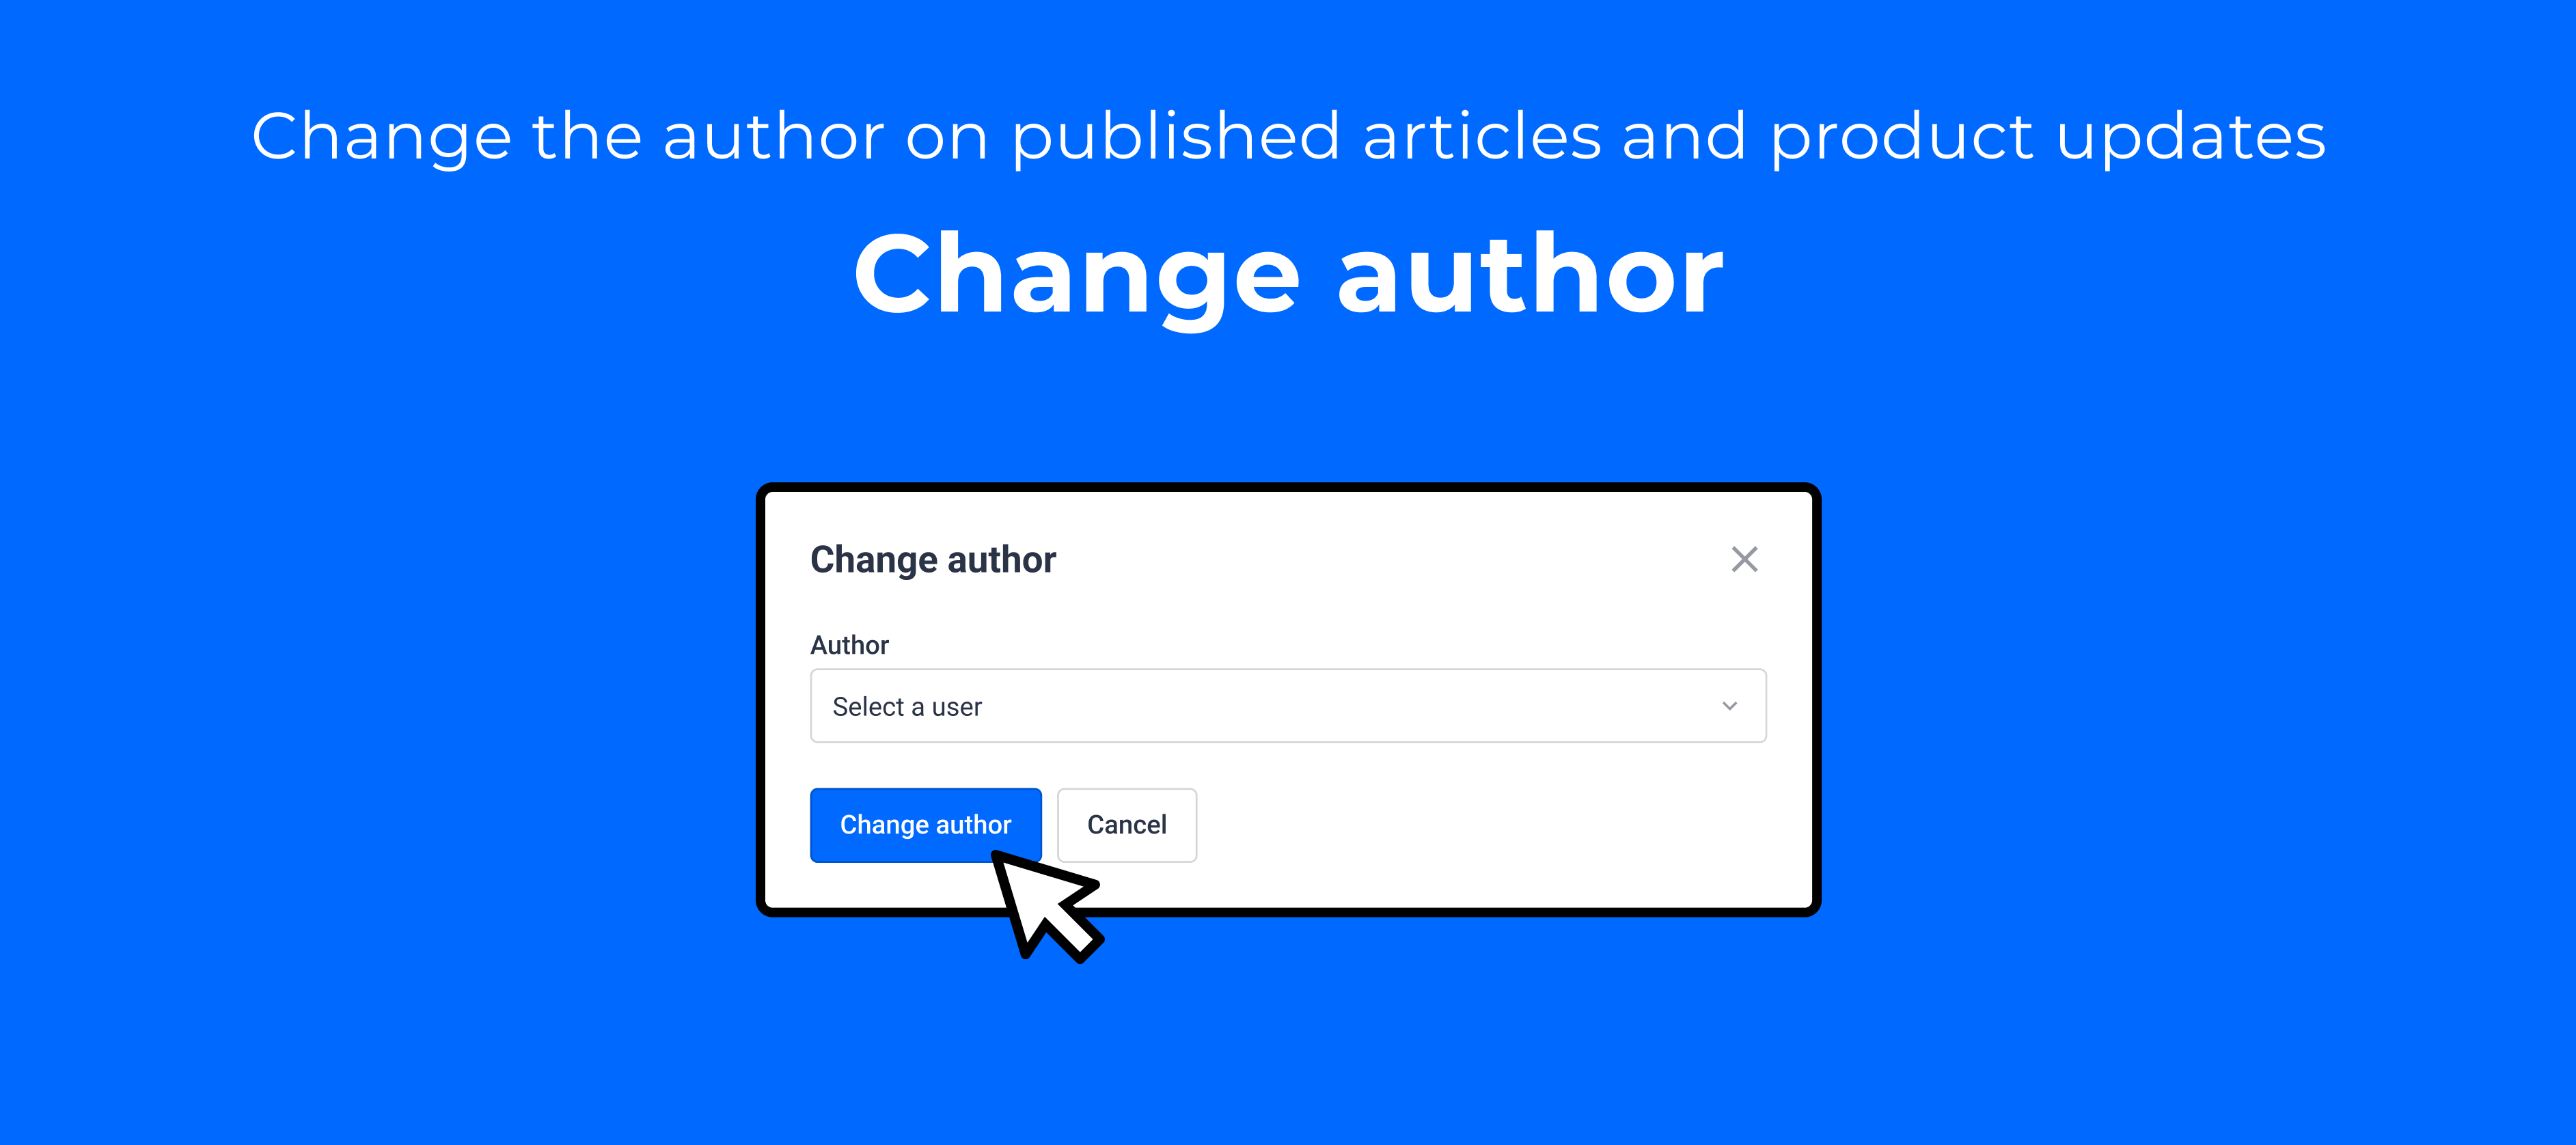 Change the author of published articles and product updates